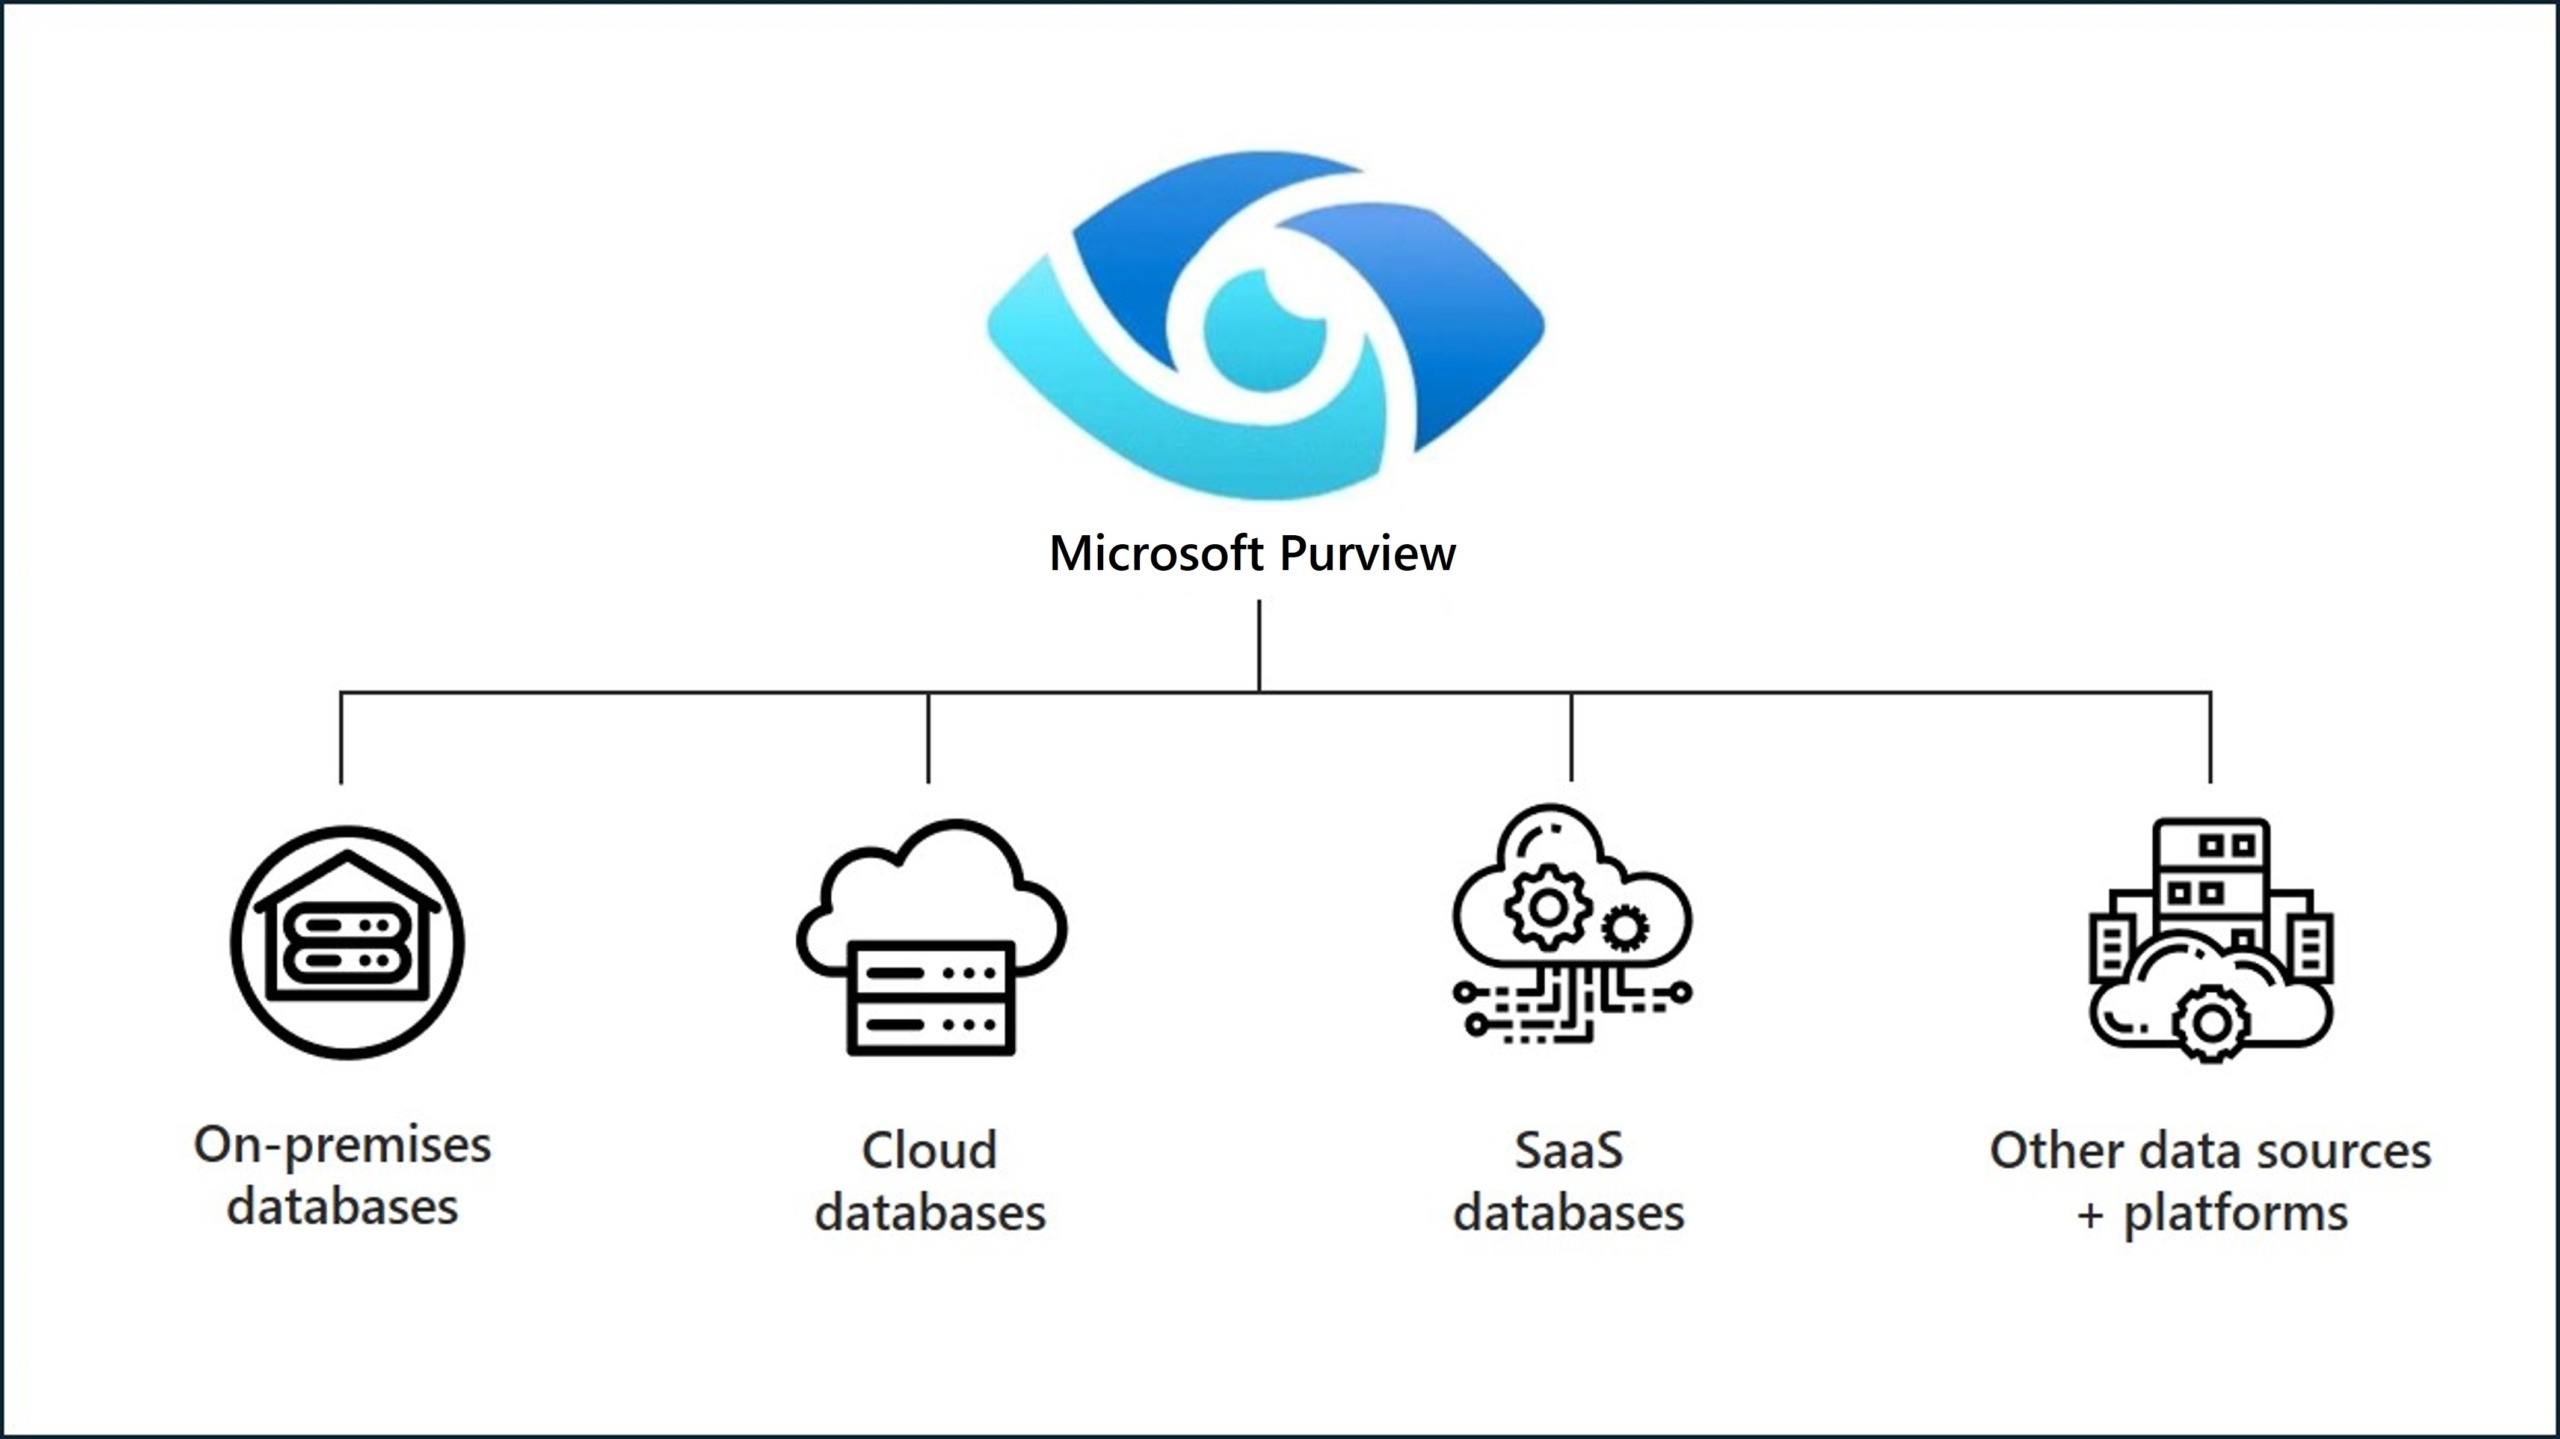 What is Microsoft Purview and why are we excited about it?